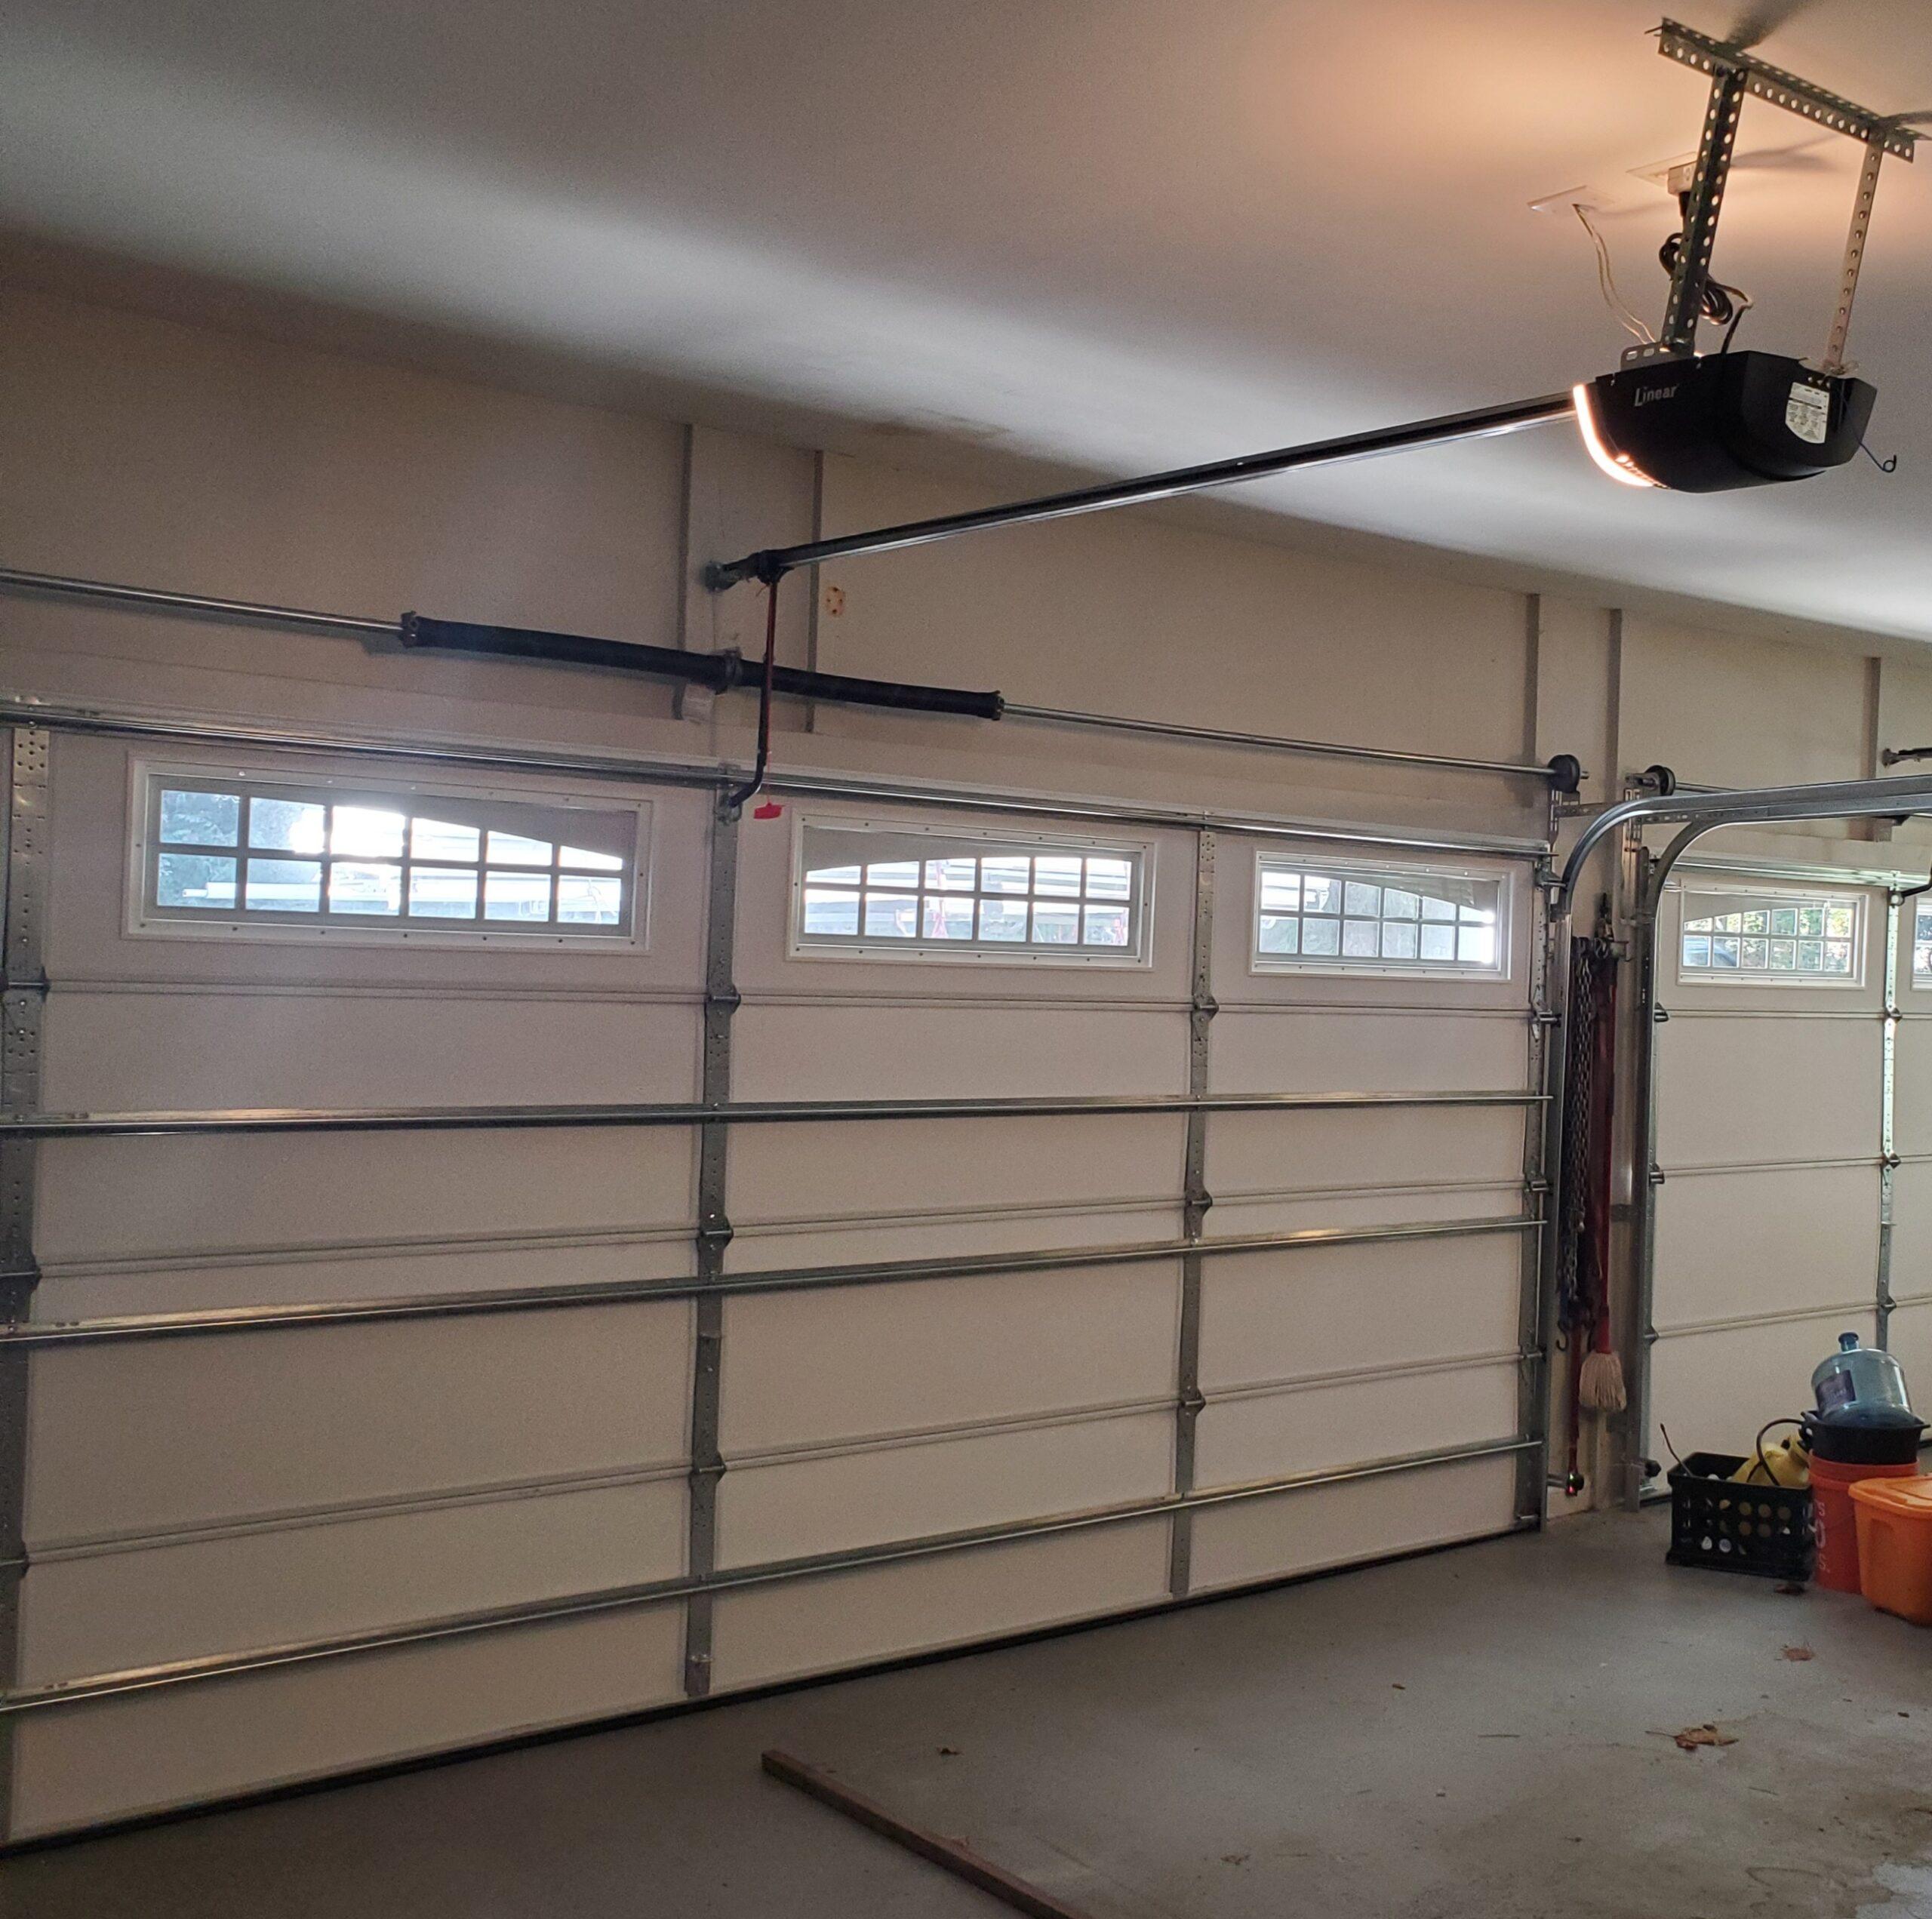 Garage Door Clicking But Not Opening – What You Need to Know